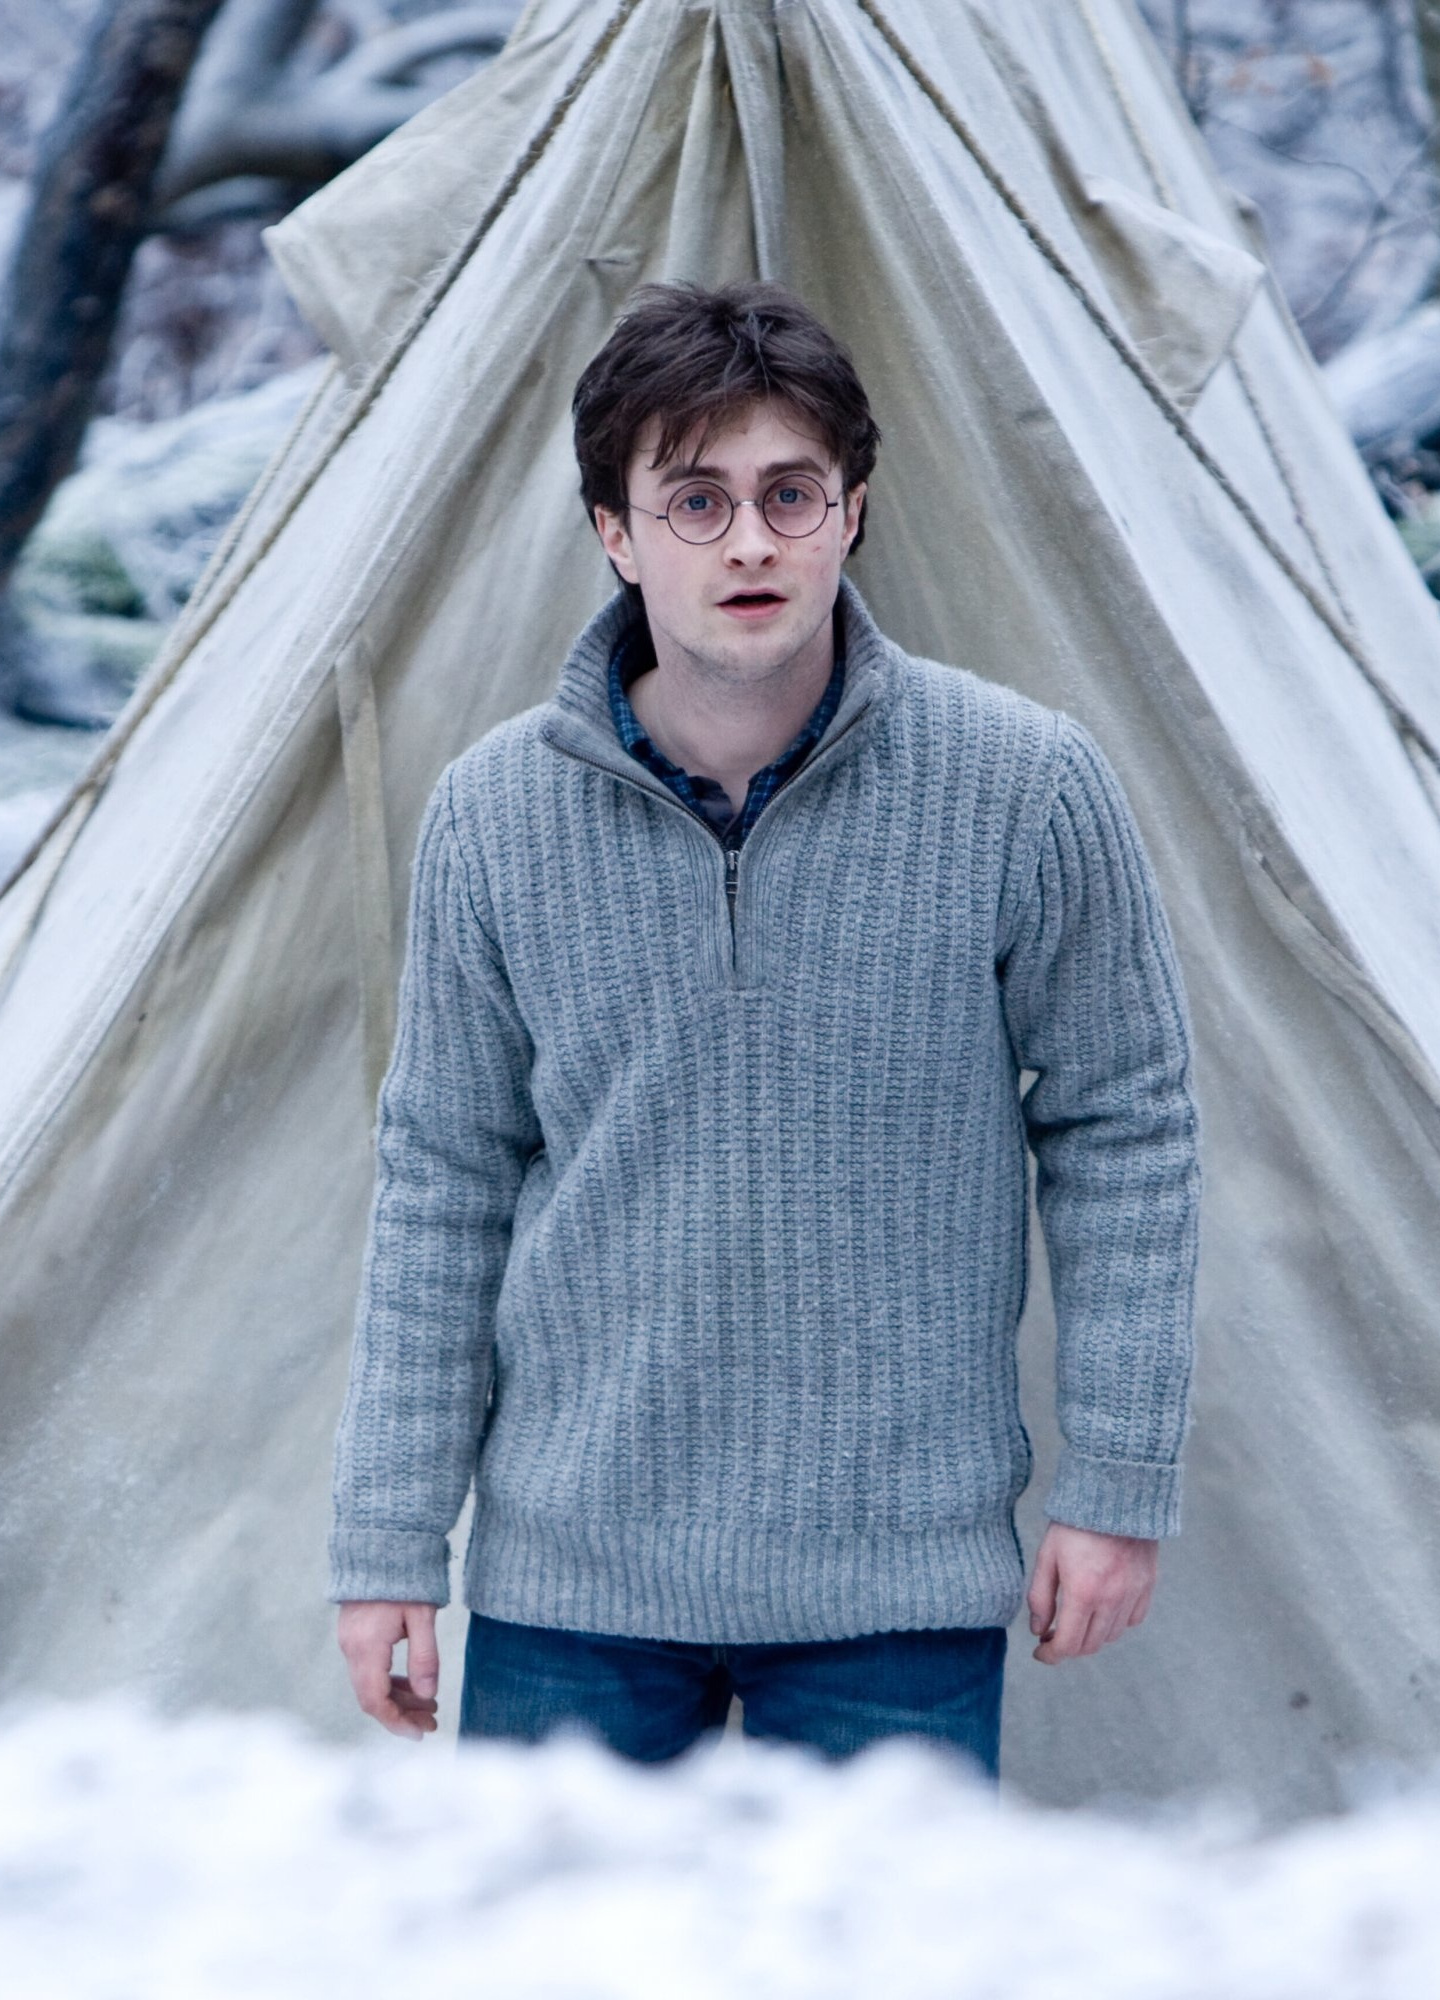 Harry Potter And The Deathly Hallows Part 1, Movie, - Daniel Radcliffe Harry Potter Deathly Hallows - HD Wallpaper 